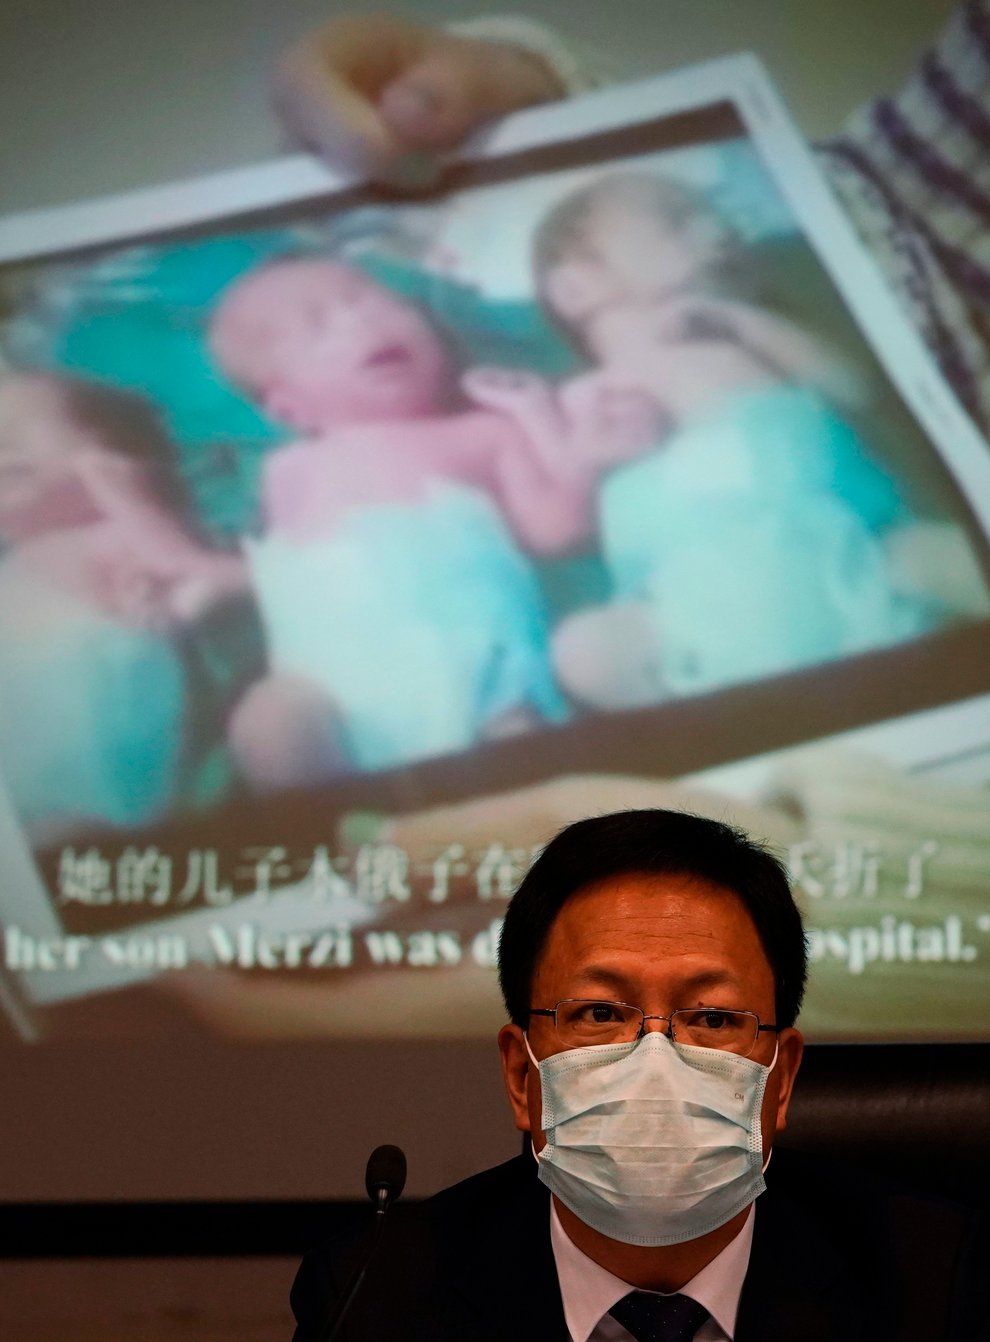 Xu Guixiang, a deputy spokesperson for the Xinjiang regional government, looks up near a slide showing a photo of Uighur infants during a press conference (Ng Han Guan/AP)